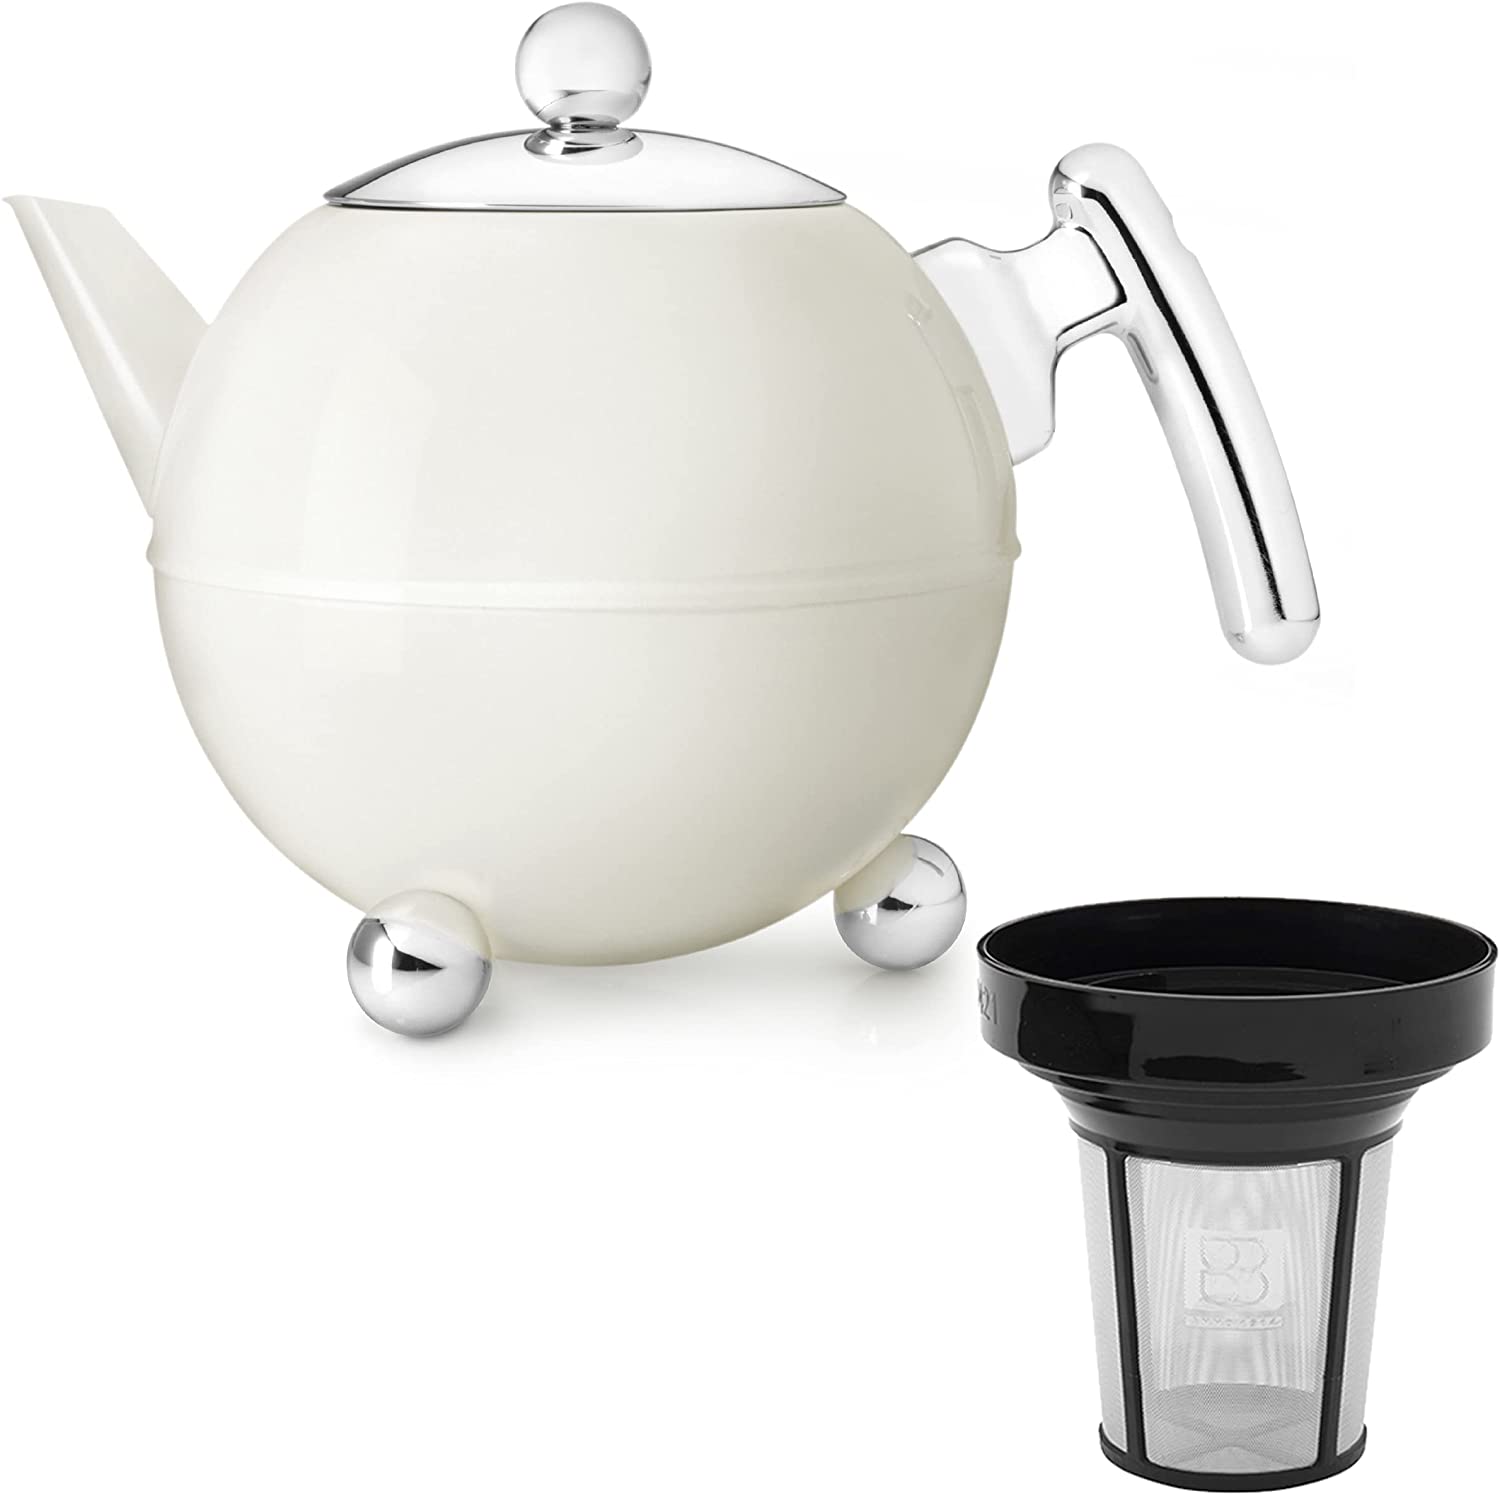 Bredemeijer Stainless Steel Teapot Set 1.2 Litres Cream-White Double-Walled with Tea Filter Strainer